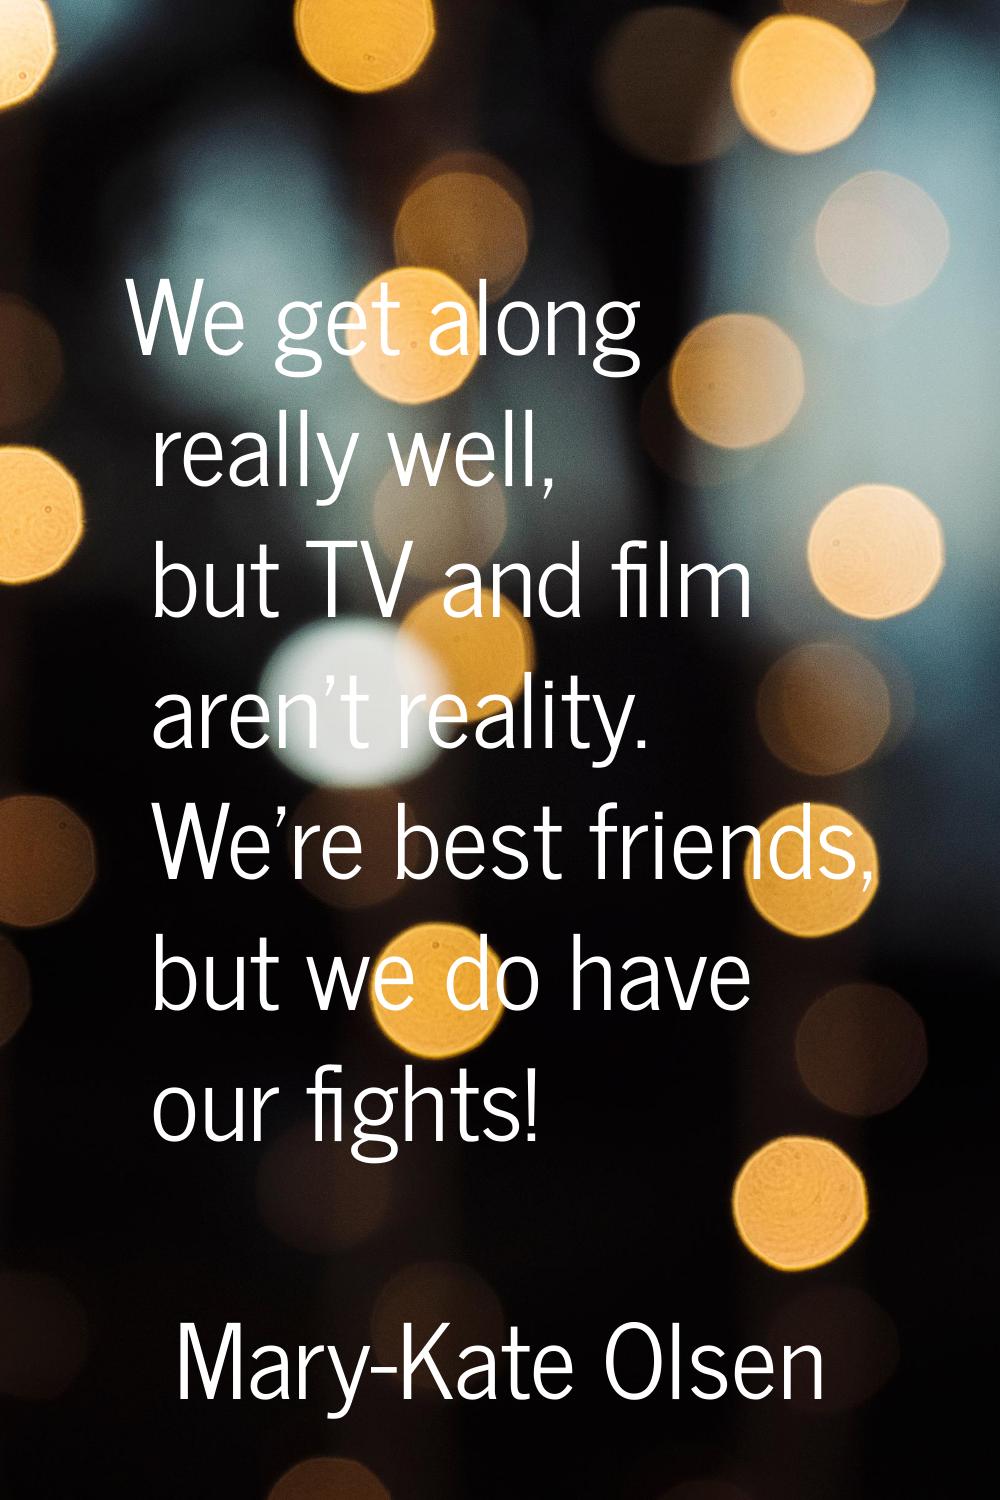 We get along really well, but TV and film aren't reality. We're best friends, but we do have our fi